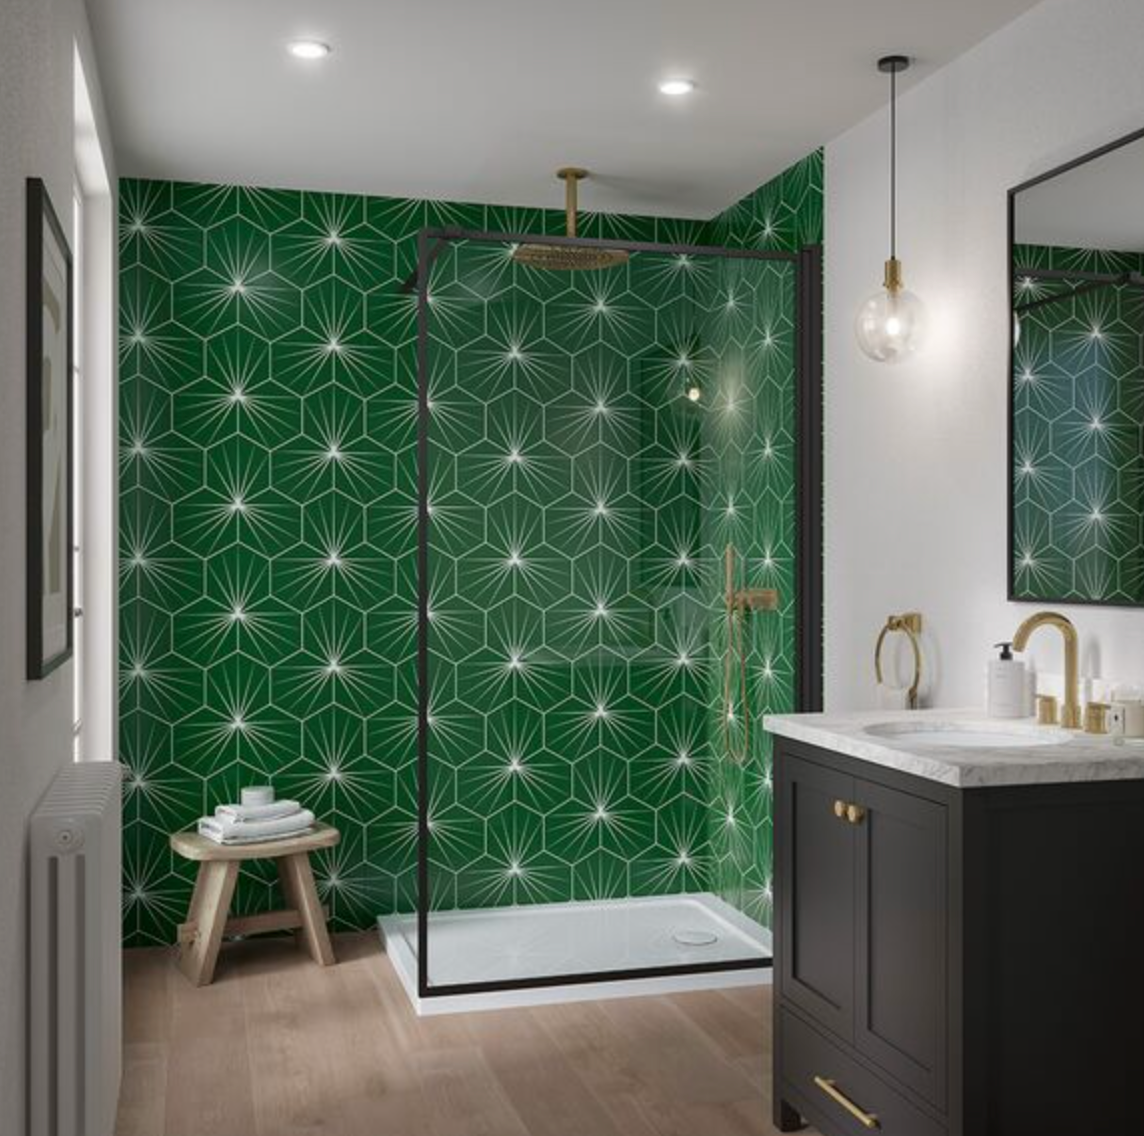 Showerwall Acrylic Patterns & Tiles Collection - Starlight Emerald